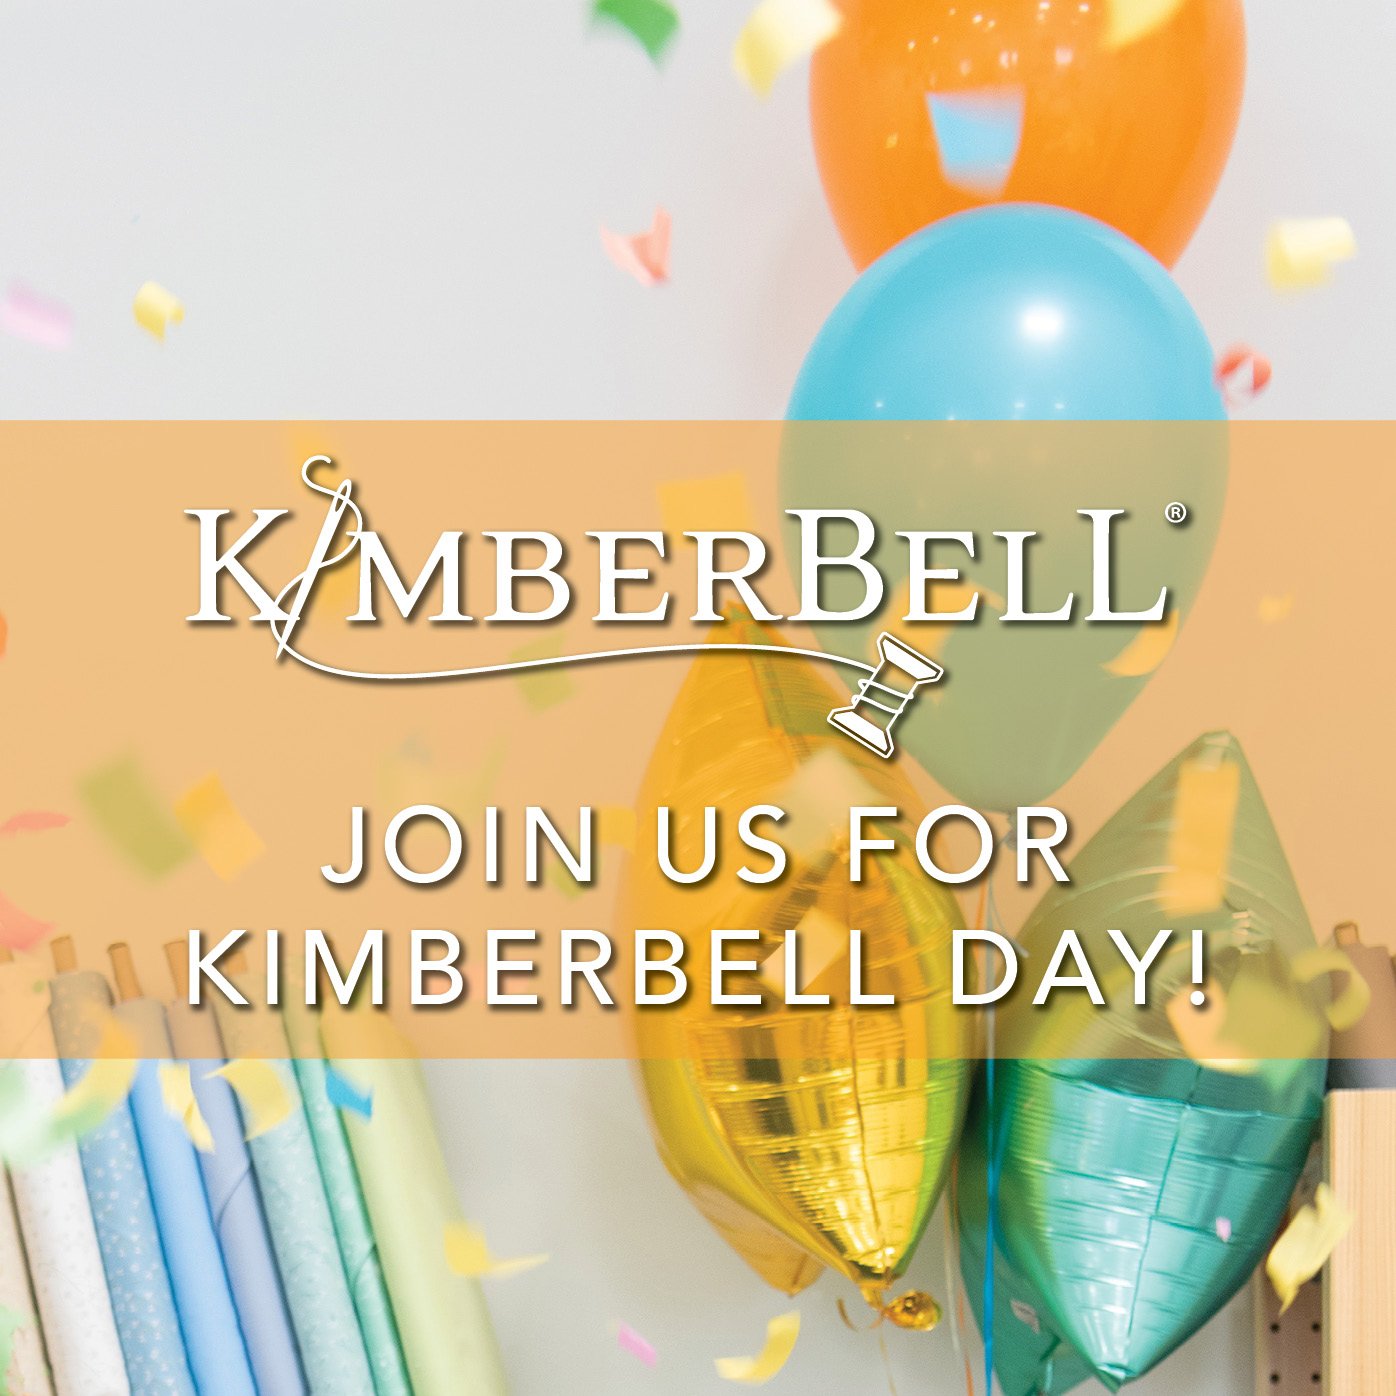 Kimberbell Day is Coming Soon!